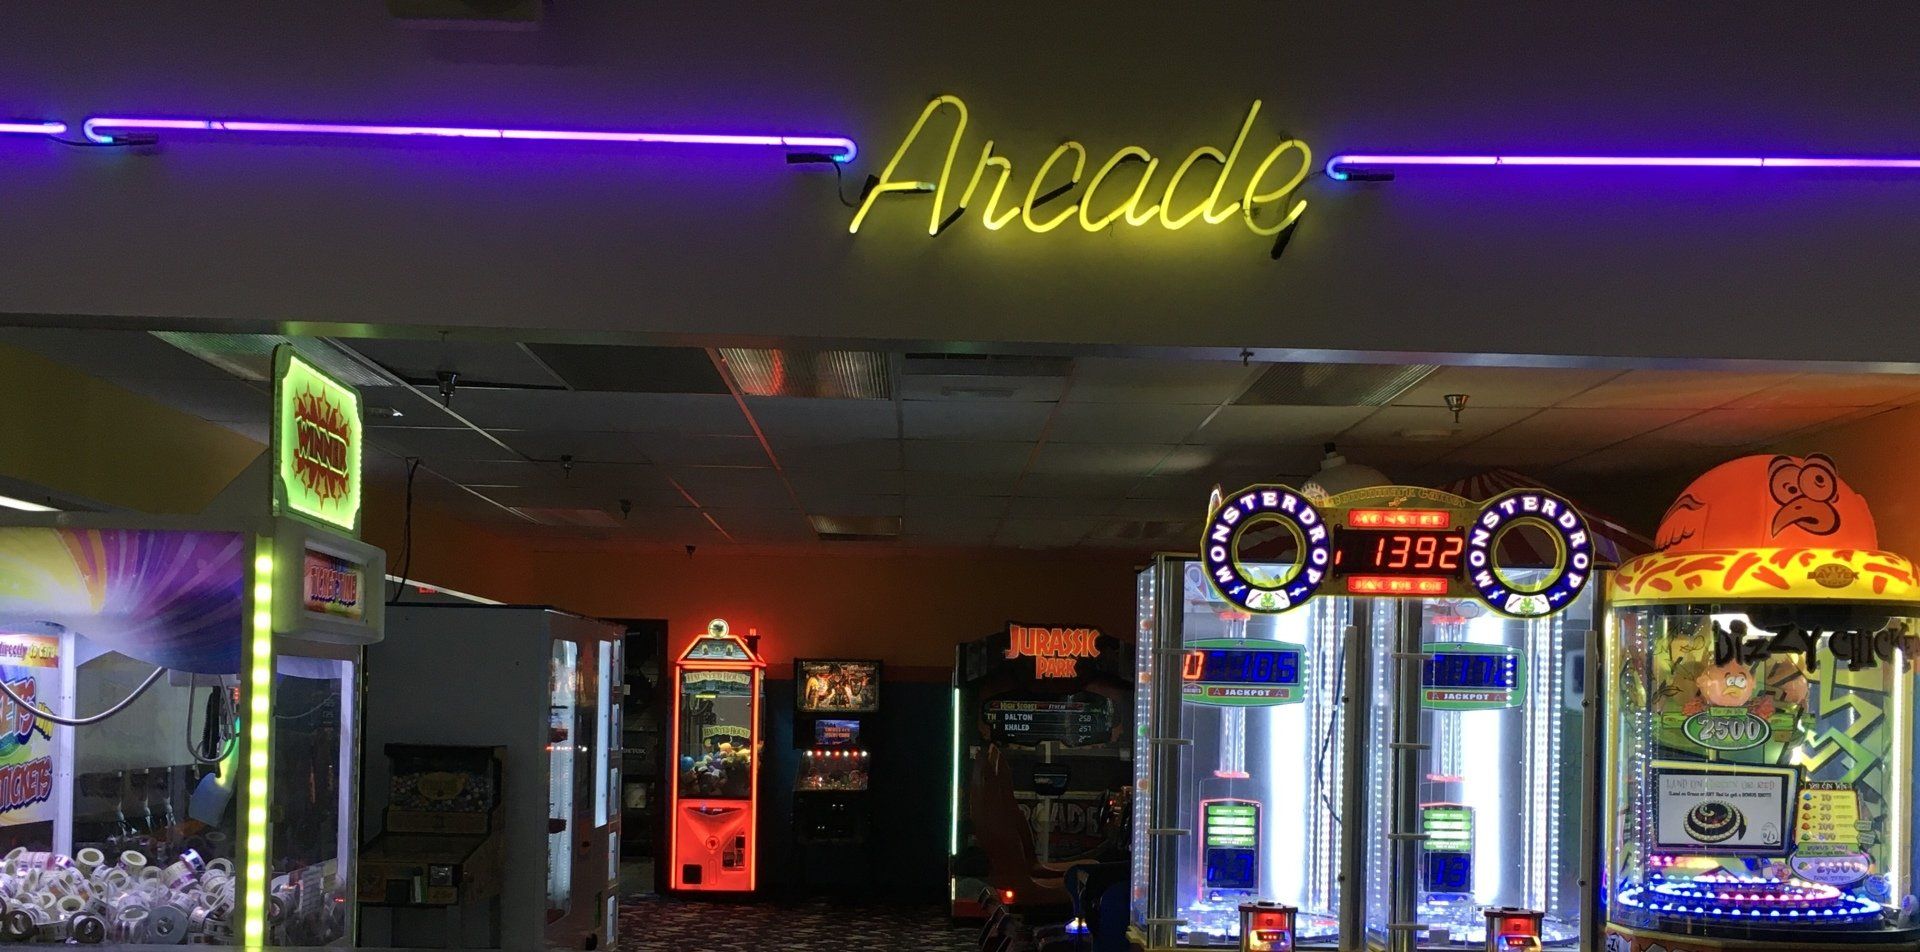 A neon sign that says arcade is hanging from the ceiling of an arcade.